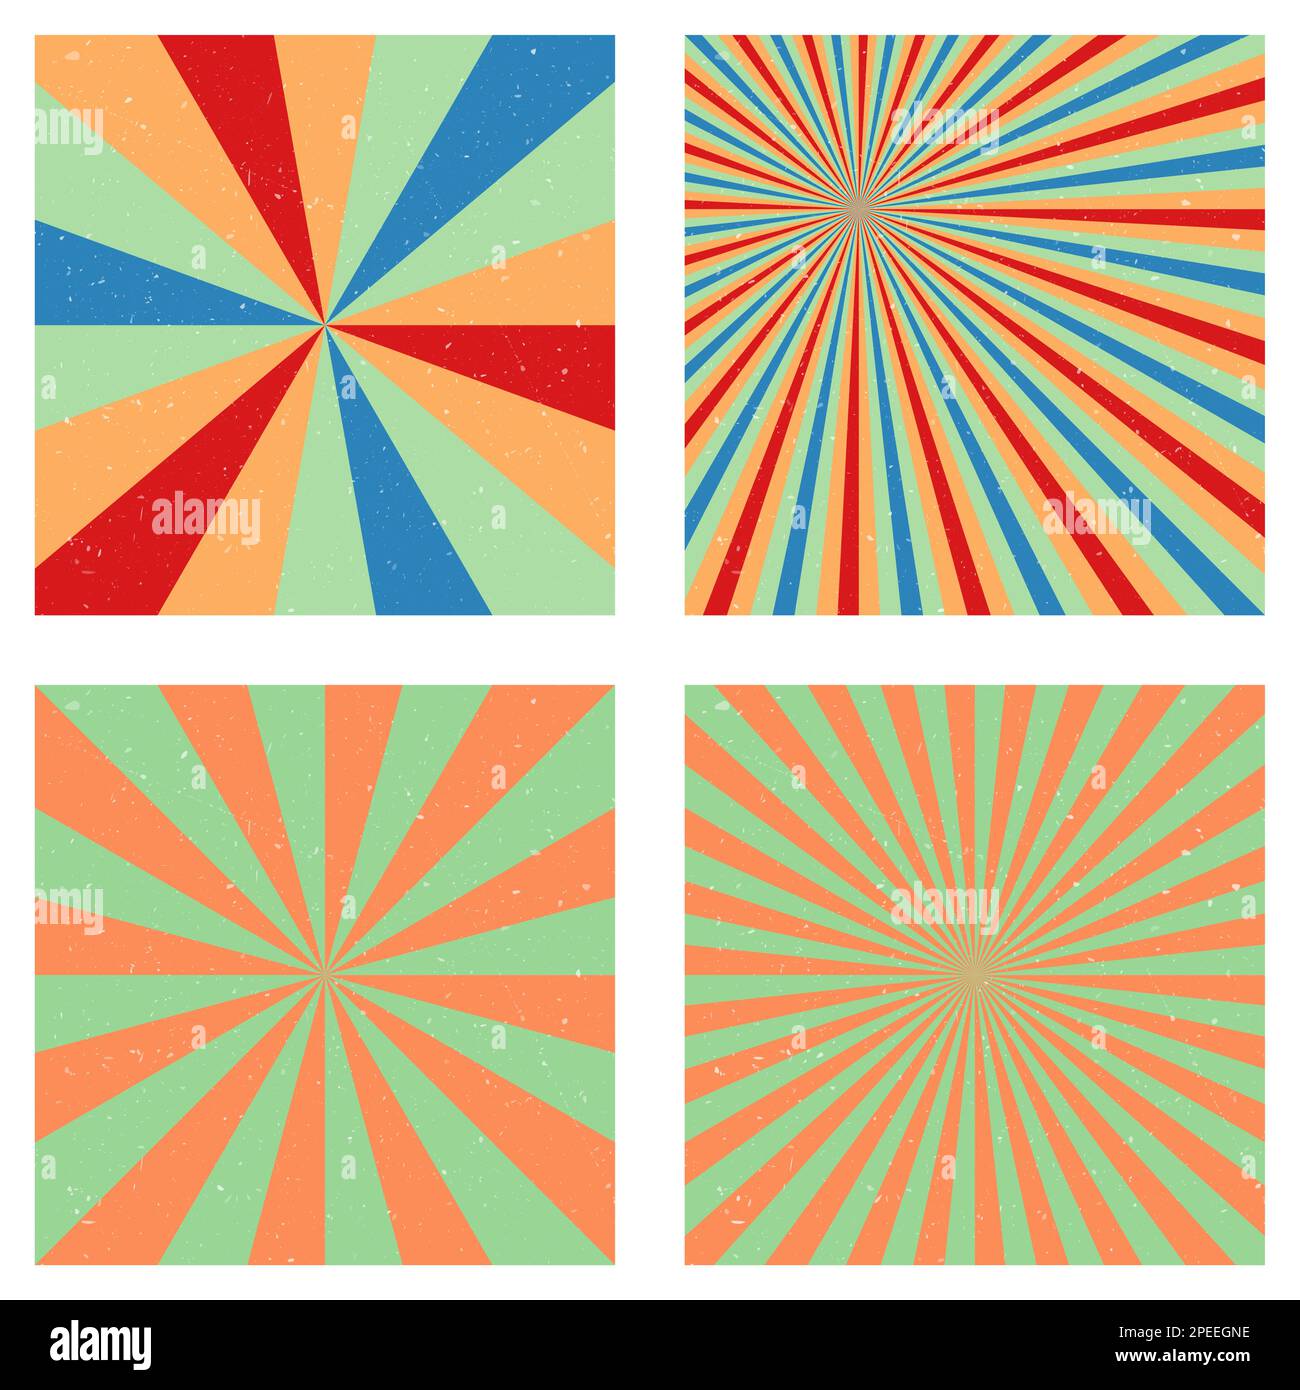 Astonishing vintage backgrounds. Abstract sunburst covers with radial rays. Appealing vector illustration. Stock Vector